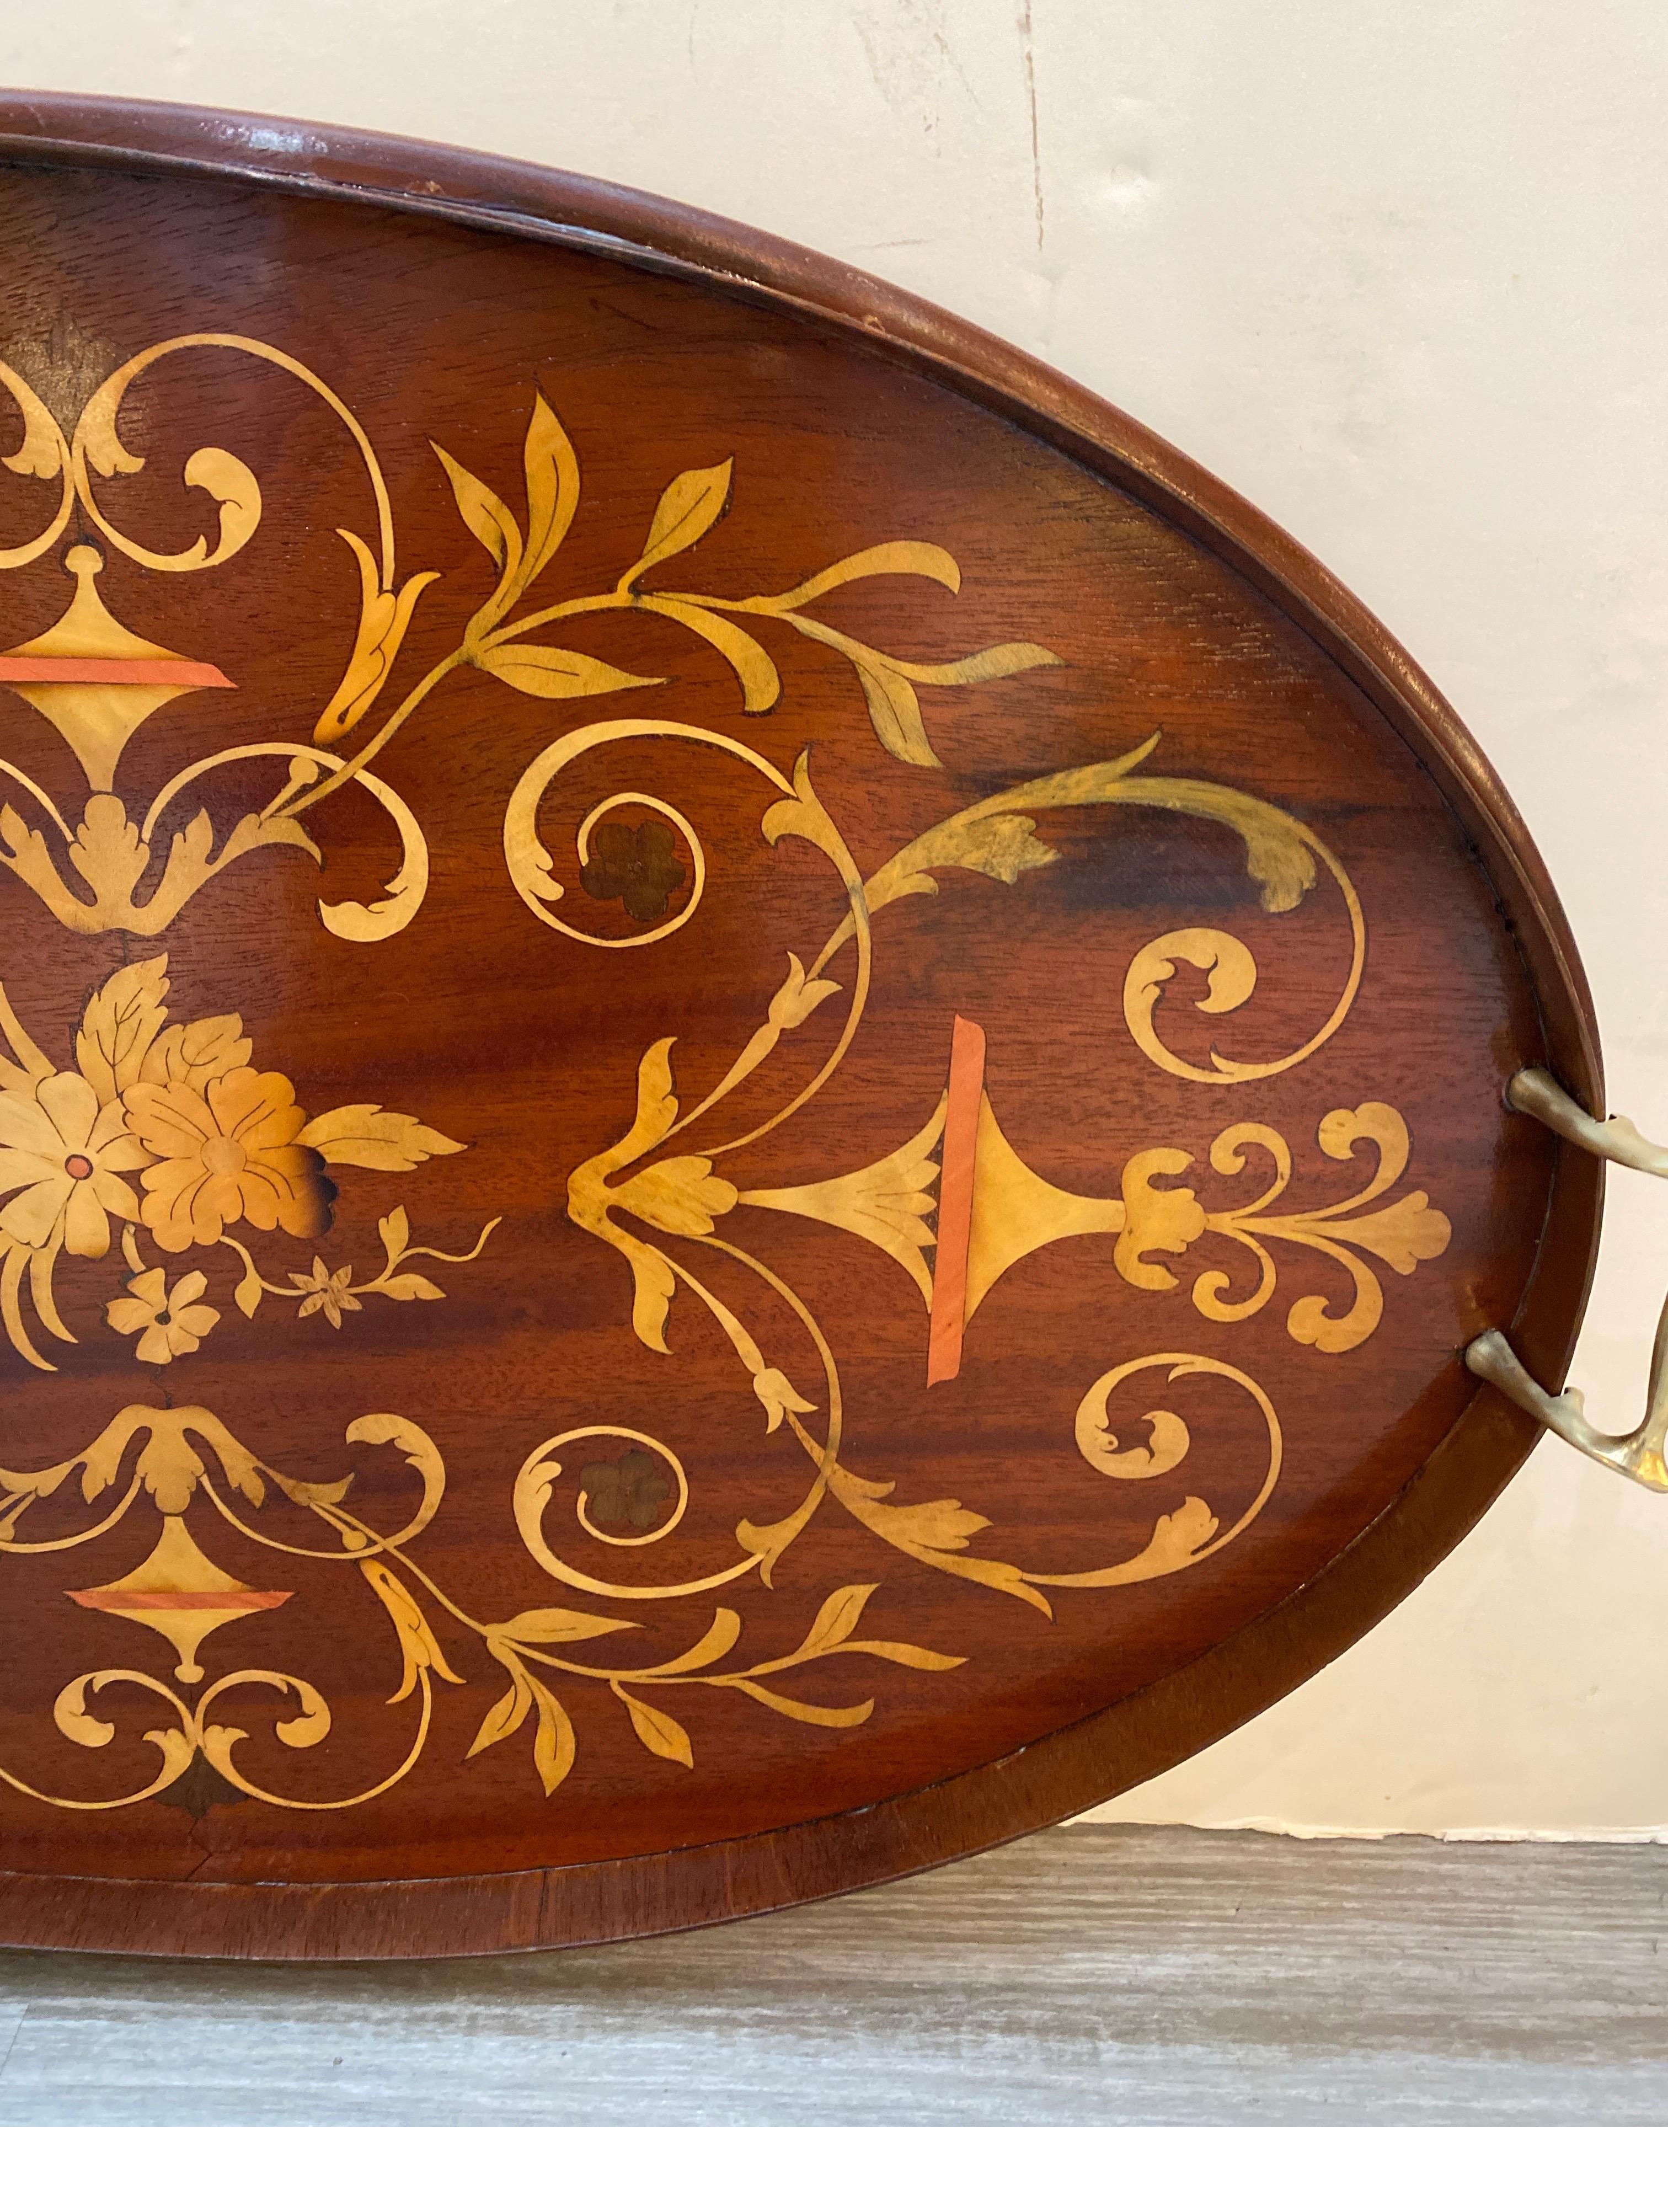 Exceptional Mahogany Inlaid Edwardian English Tray In Good Condition For Sale In Lambertville, NJ